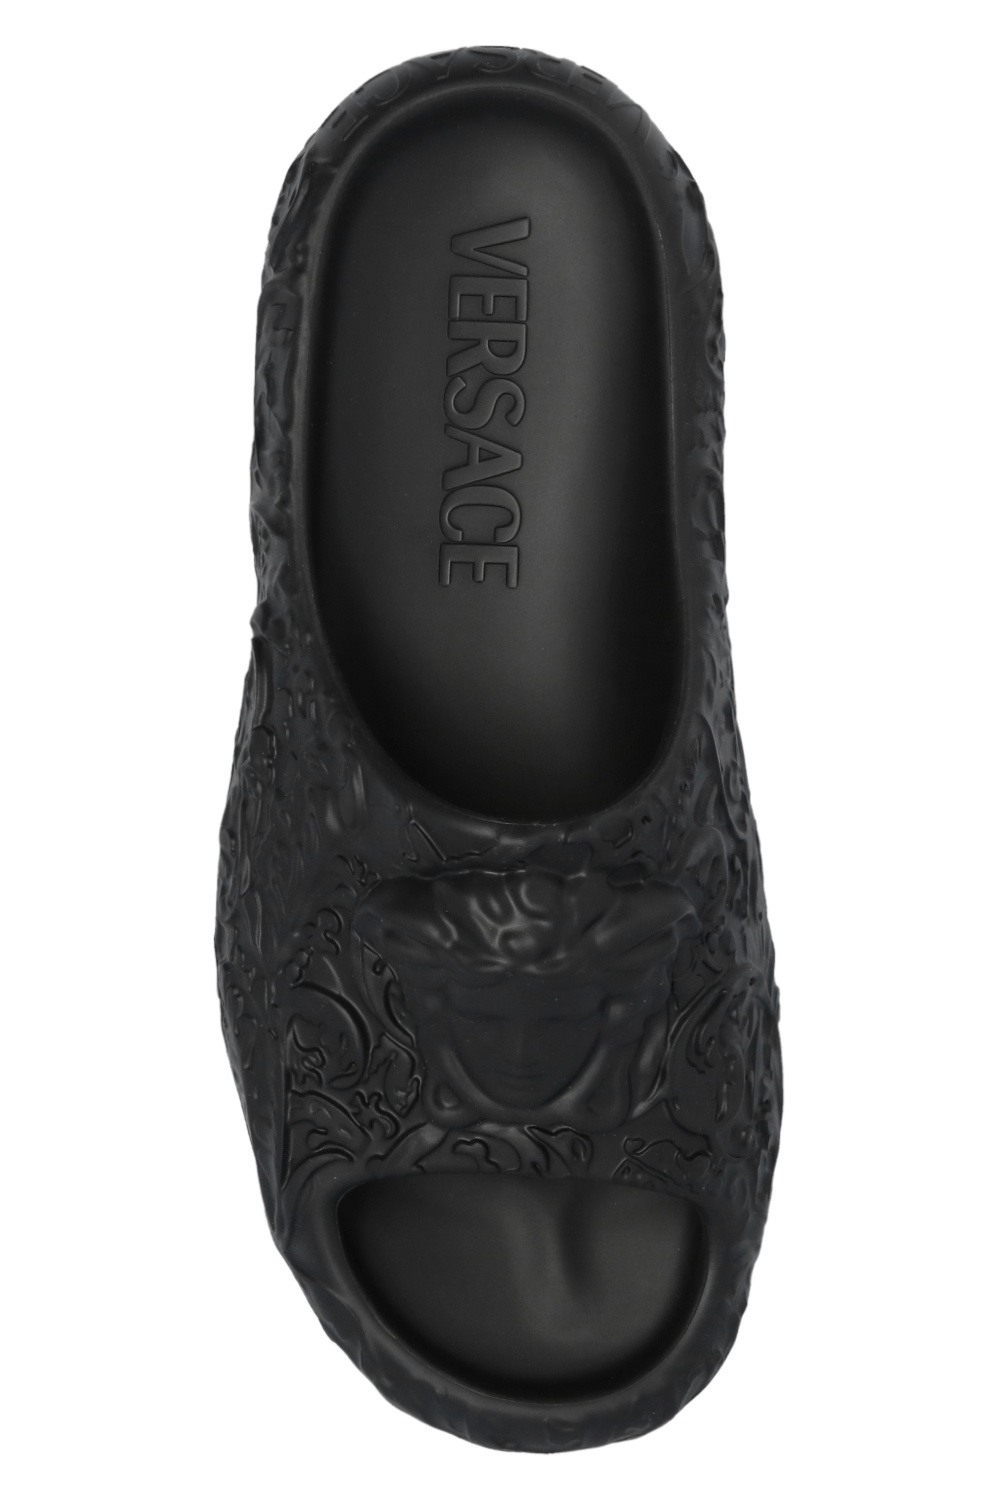 Versace Always a leader and innovator in the avant-garde lifestyle sneaker world